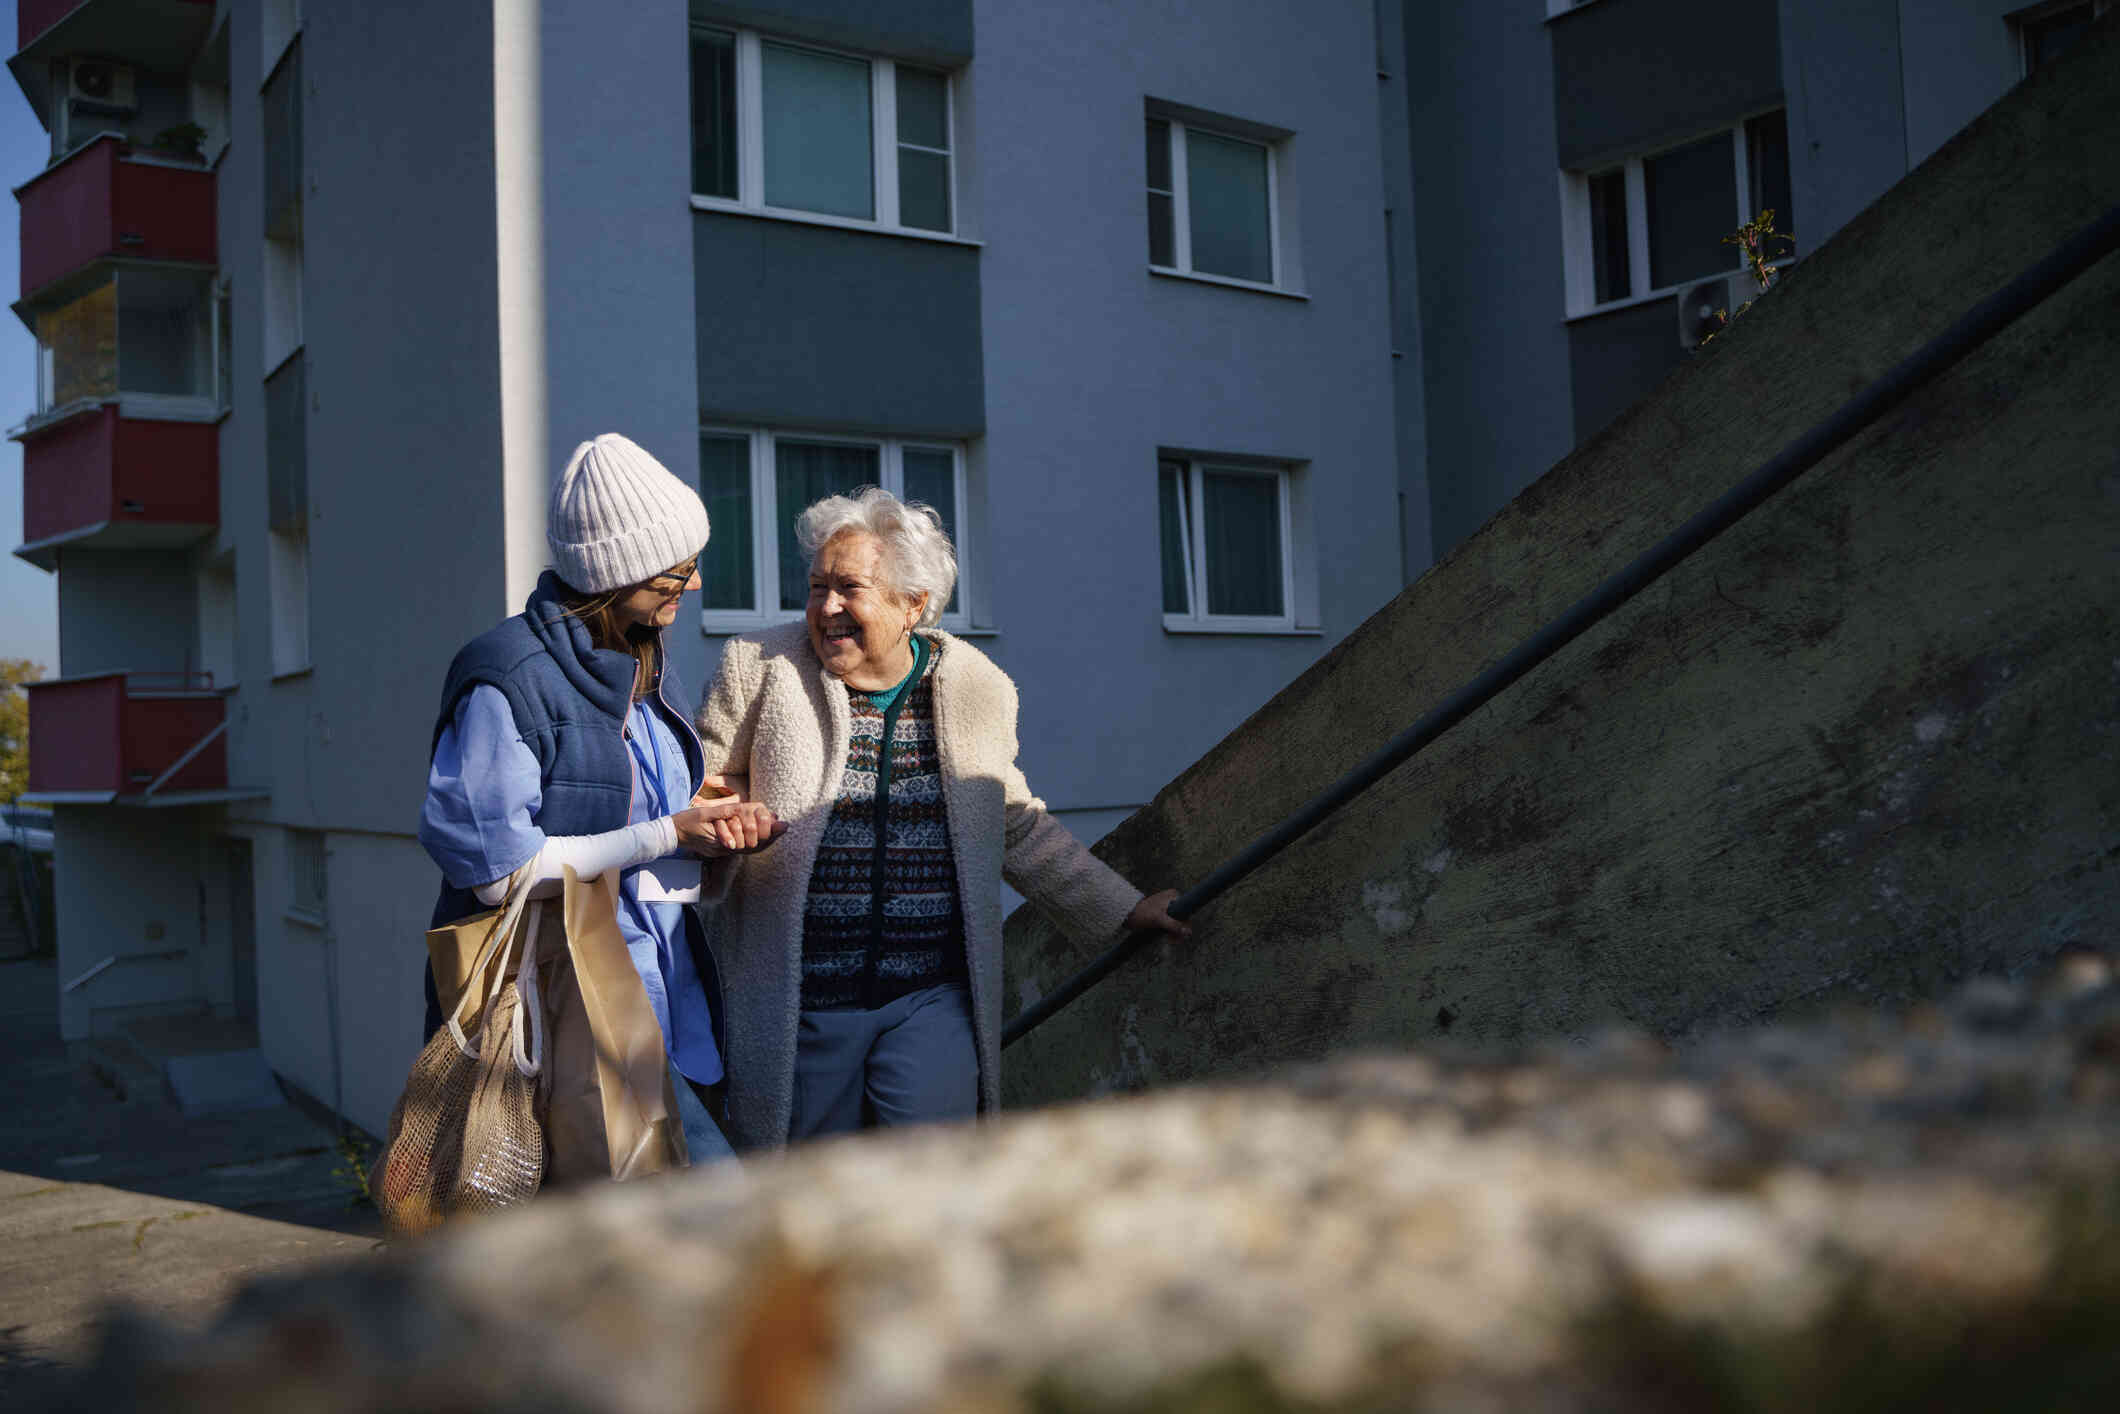 A female nurse in blue scrubs and jacket helps an elderly woman walk up some cement steps while outside on a cold day.